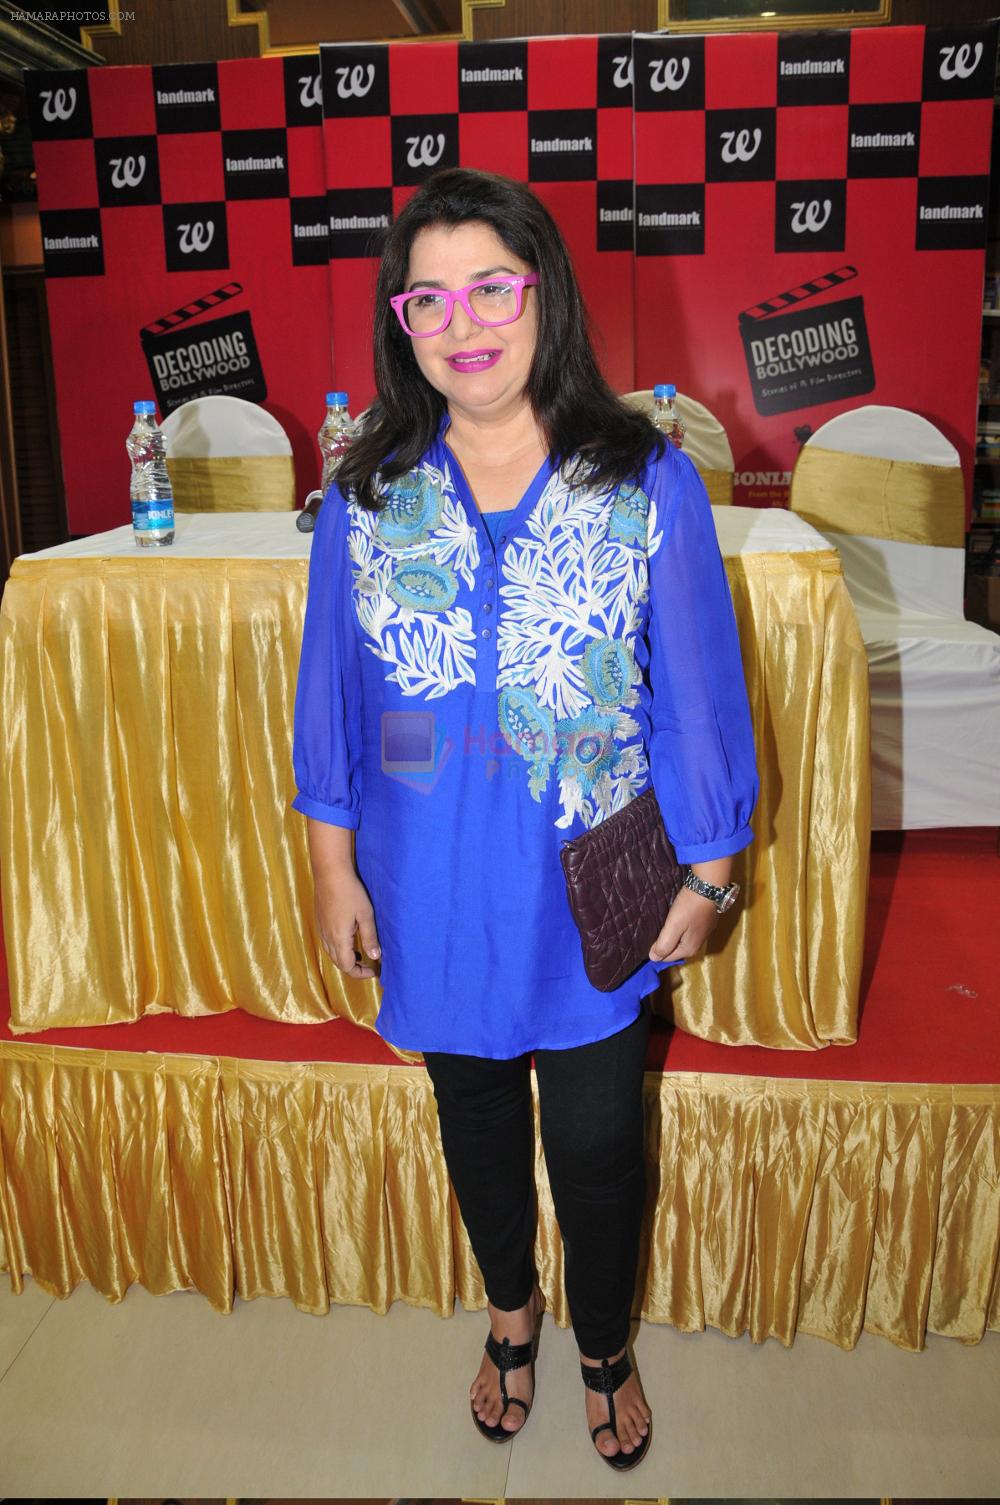 Director Farah Khan seen at Decoding Bollywood book launch event by Author Sonia Golani of Westland publishers.